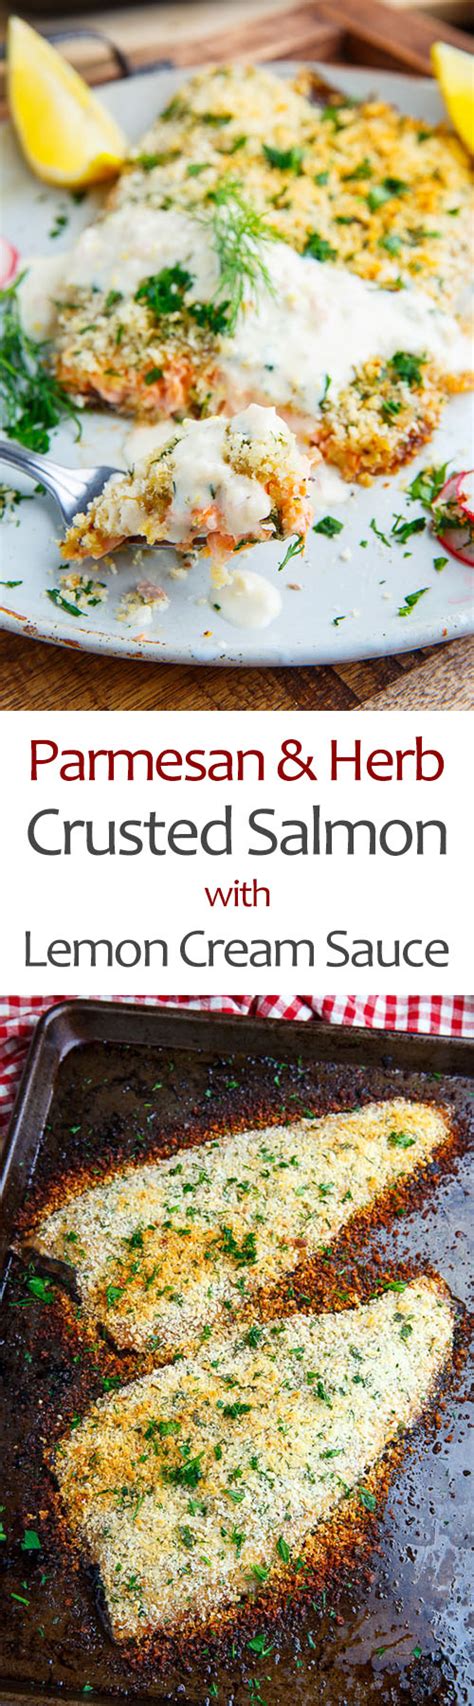 parmesan-and-herb-crusted-salmon-with-lemon image